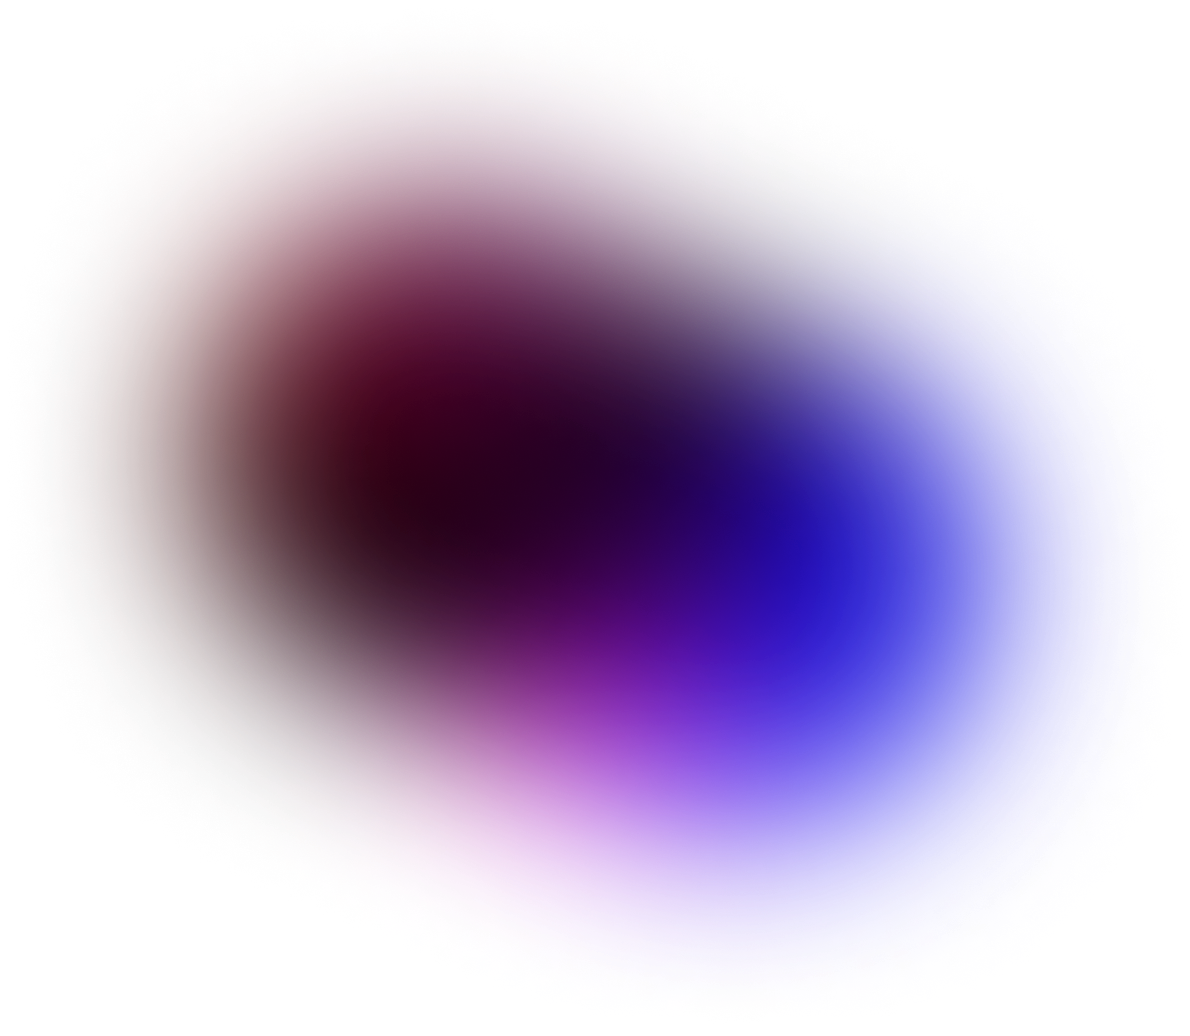 Red and blue blurred circles